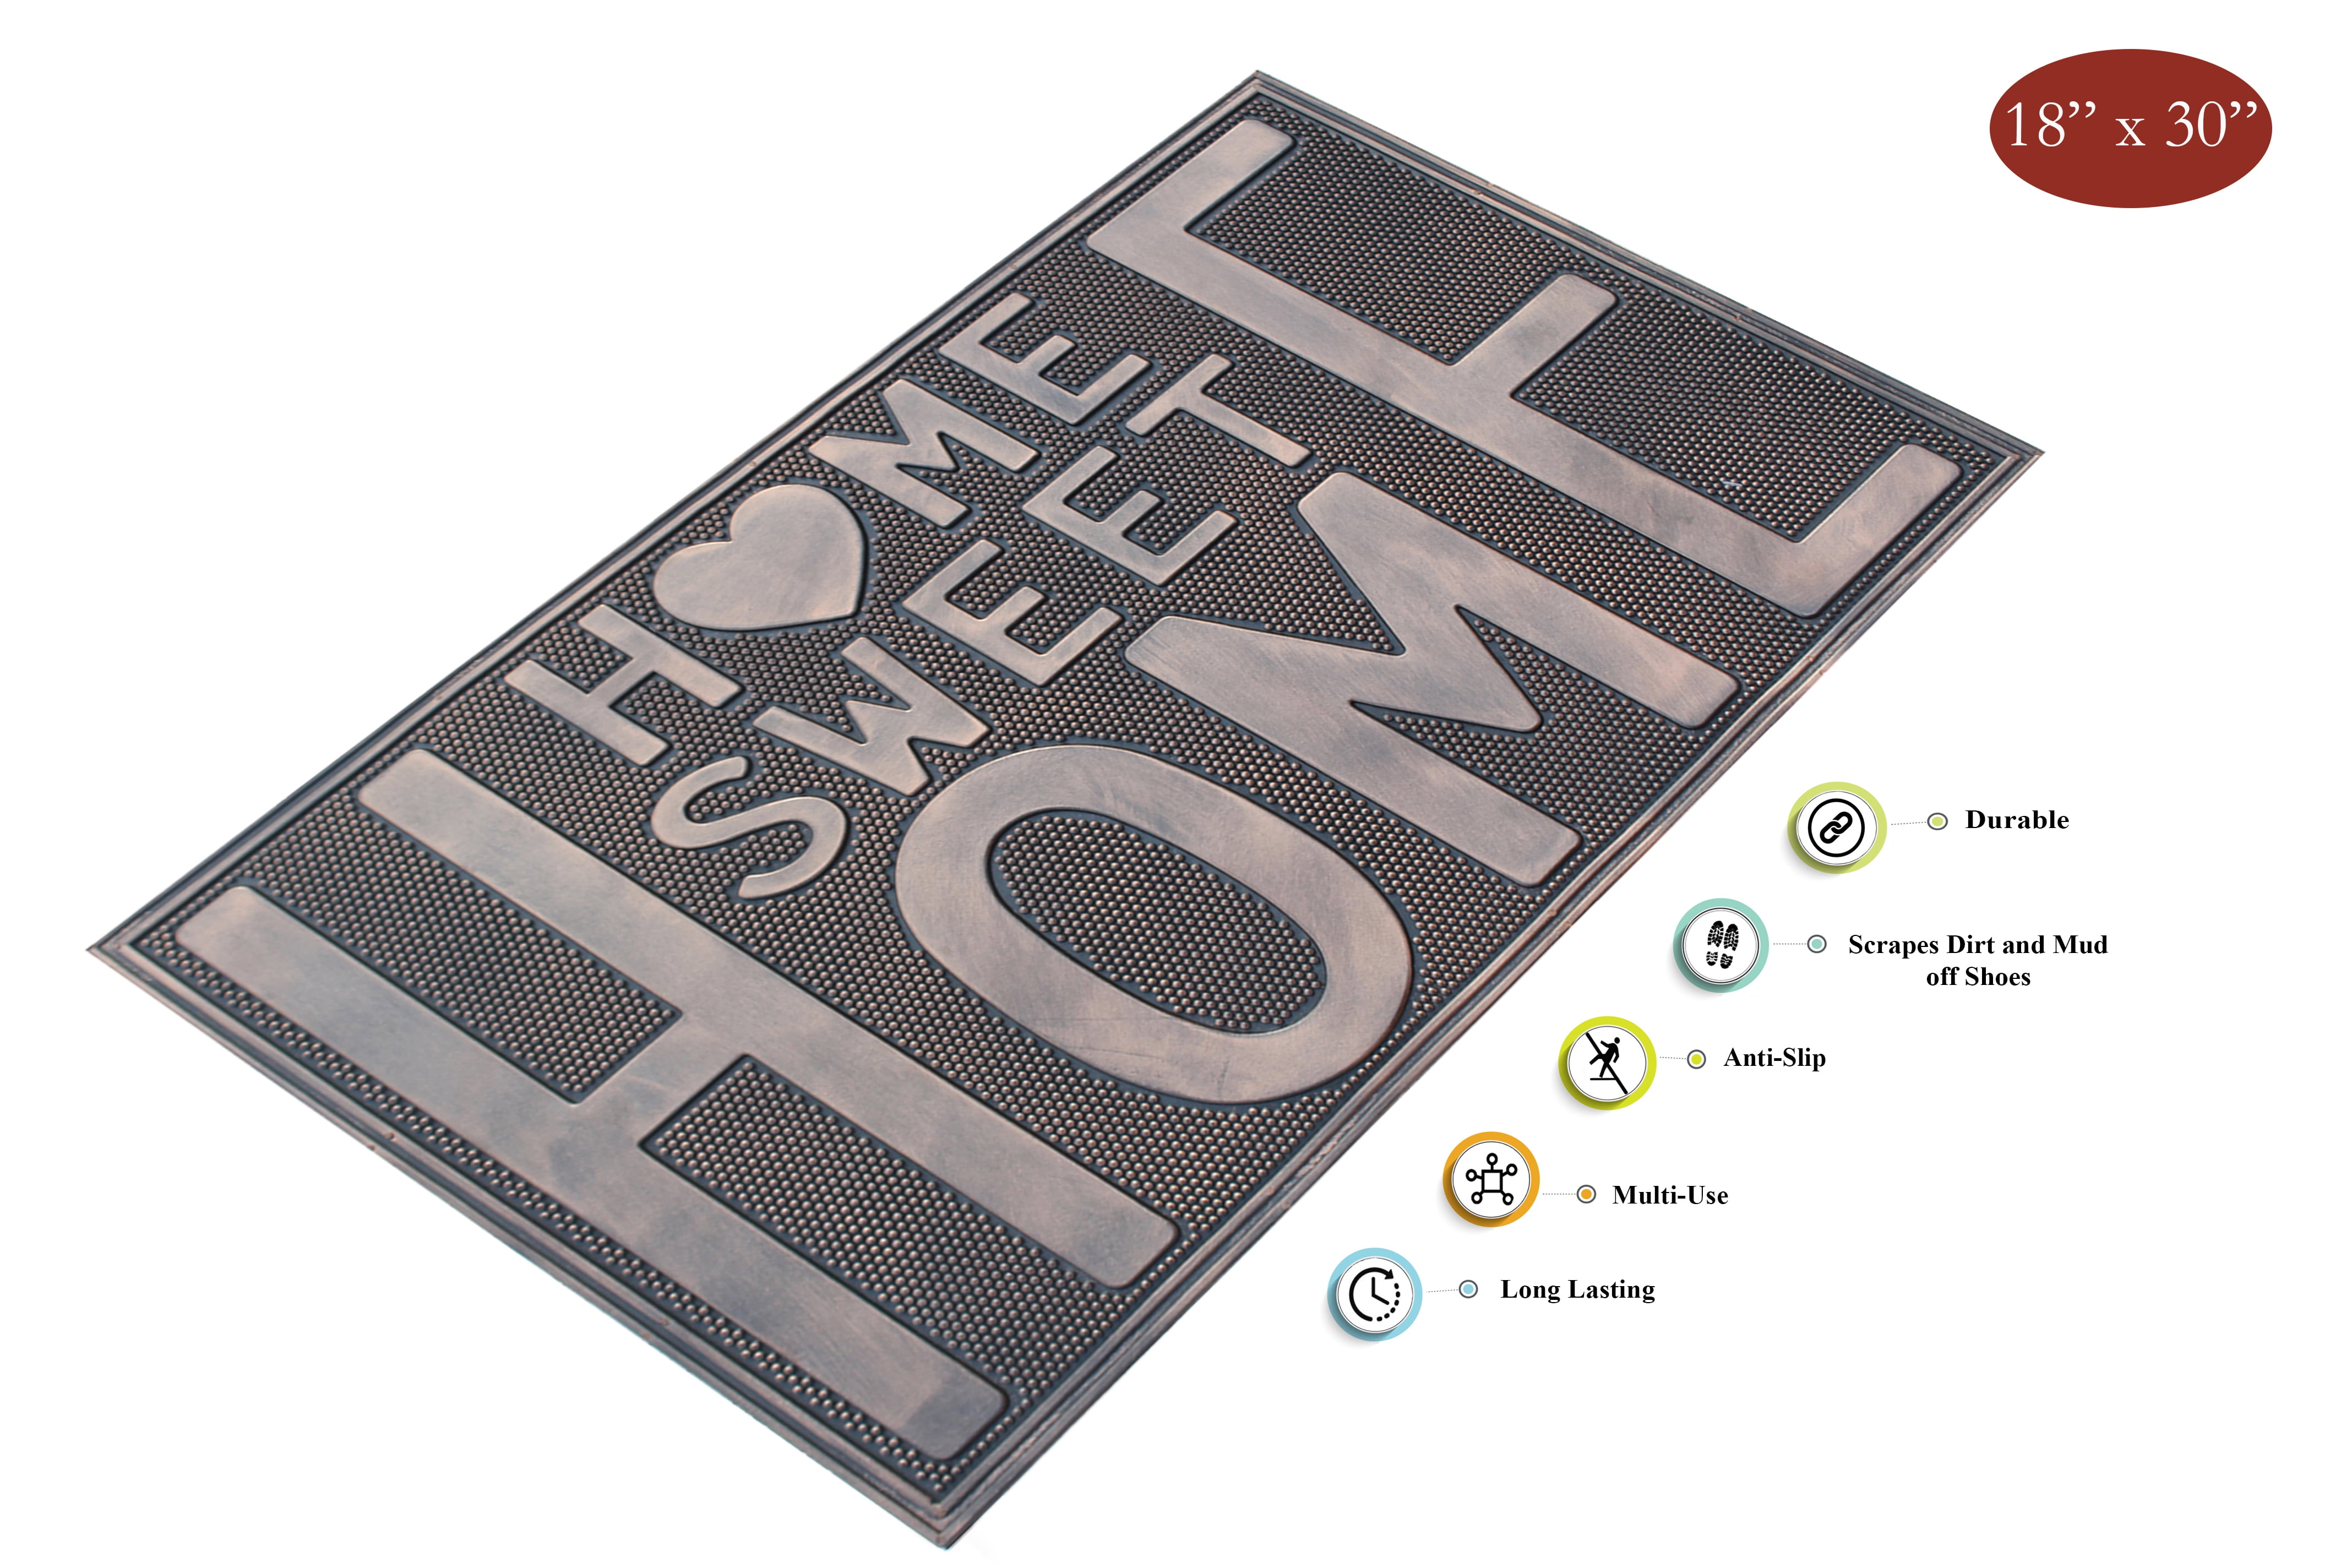 A1 Home Collections LLC A1hc Home Sweet Home Rubber Pin Mat Heavy Duty Doormat, Copper - 24 inchx39 inch, Size: 24x39 - Copper